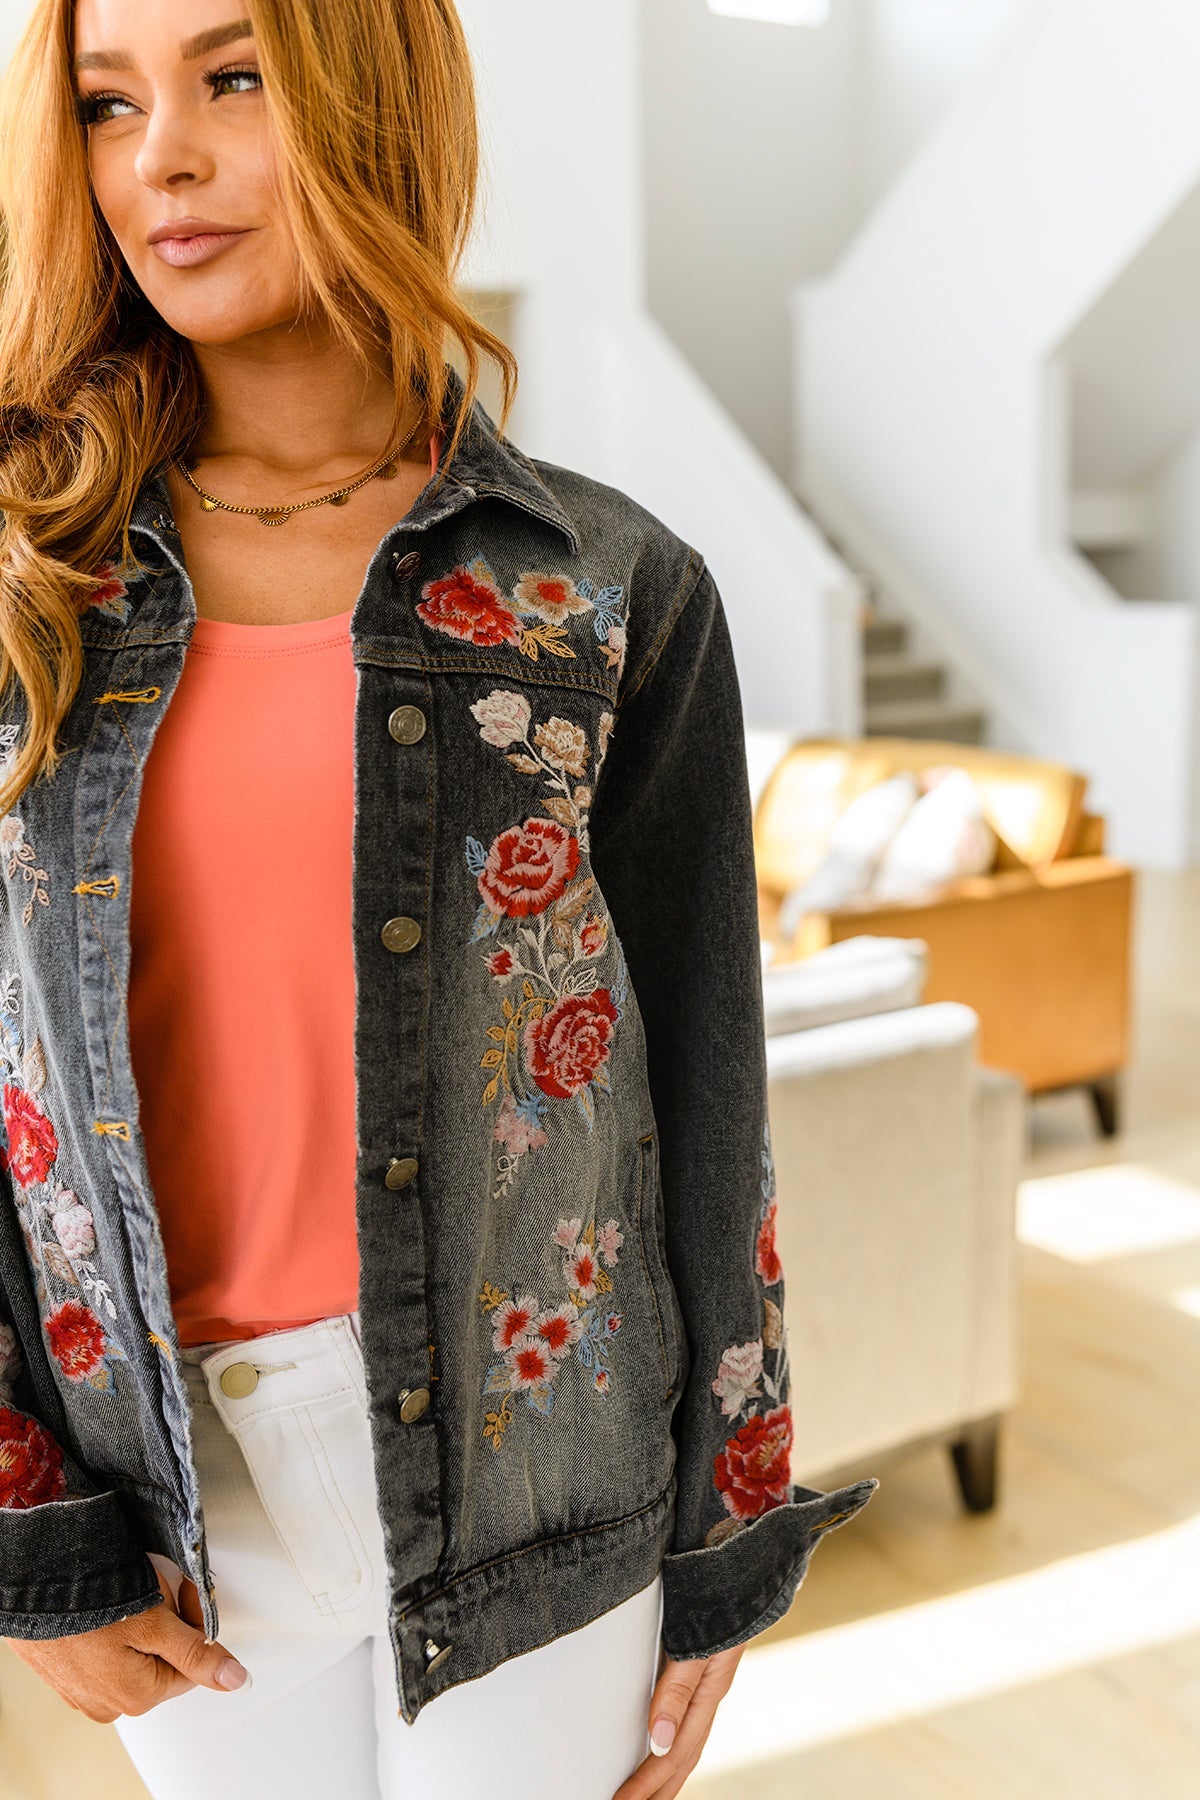 Lovely Visions Flower Embroidered Jacket - Mulberry Skies